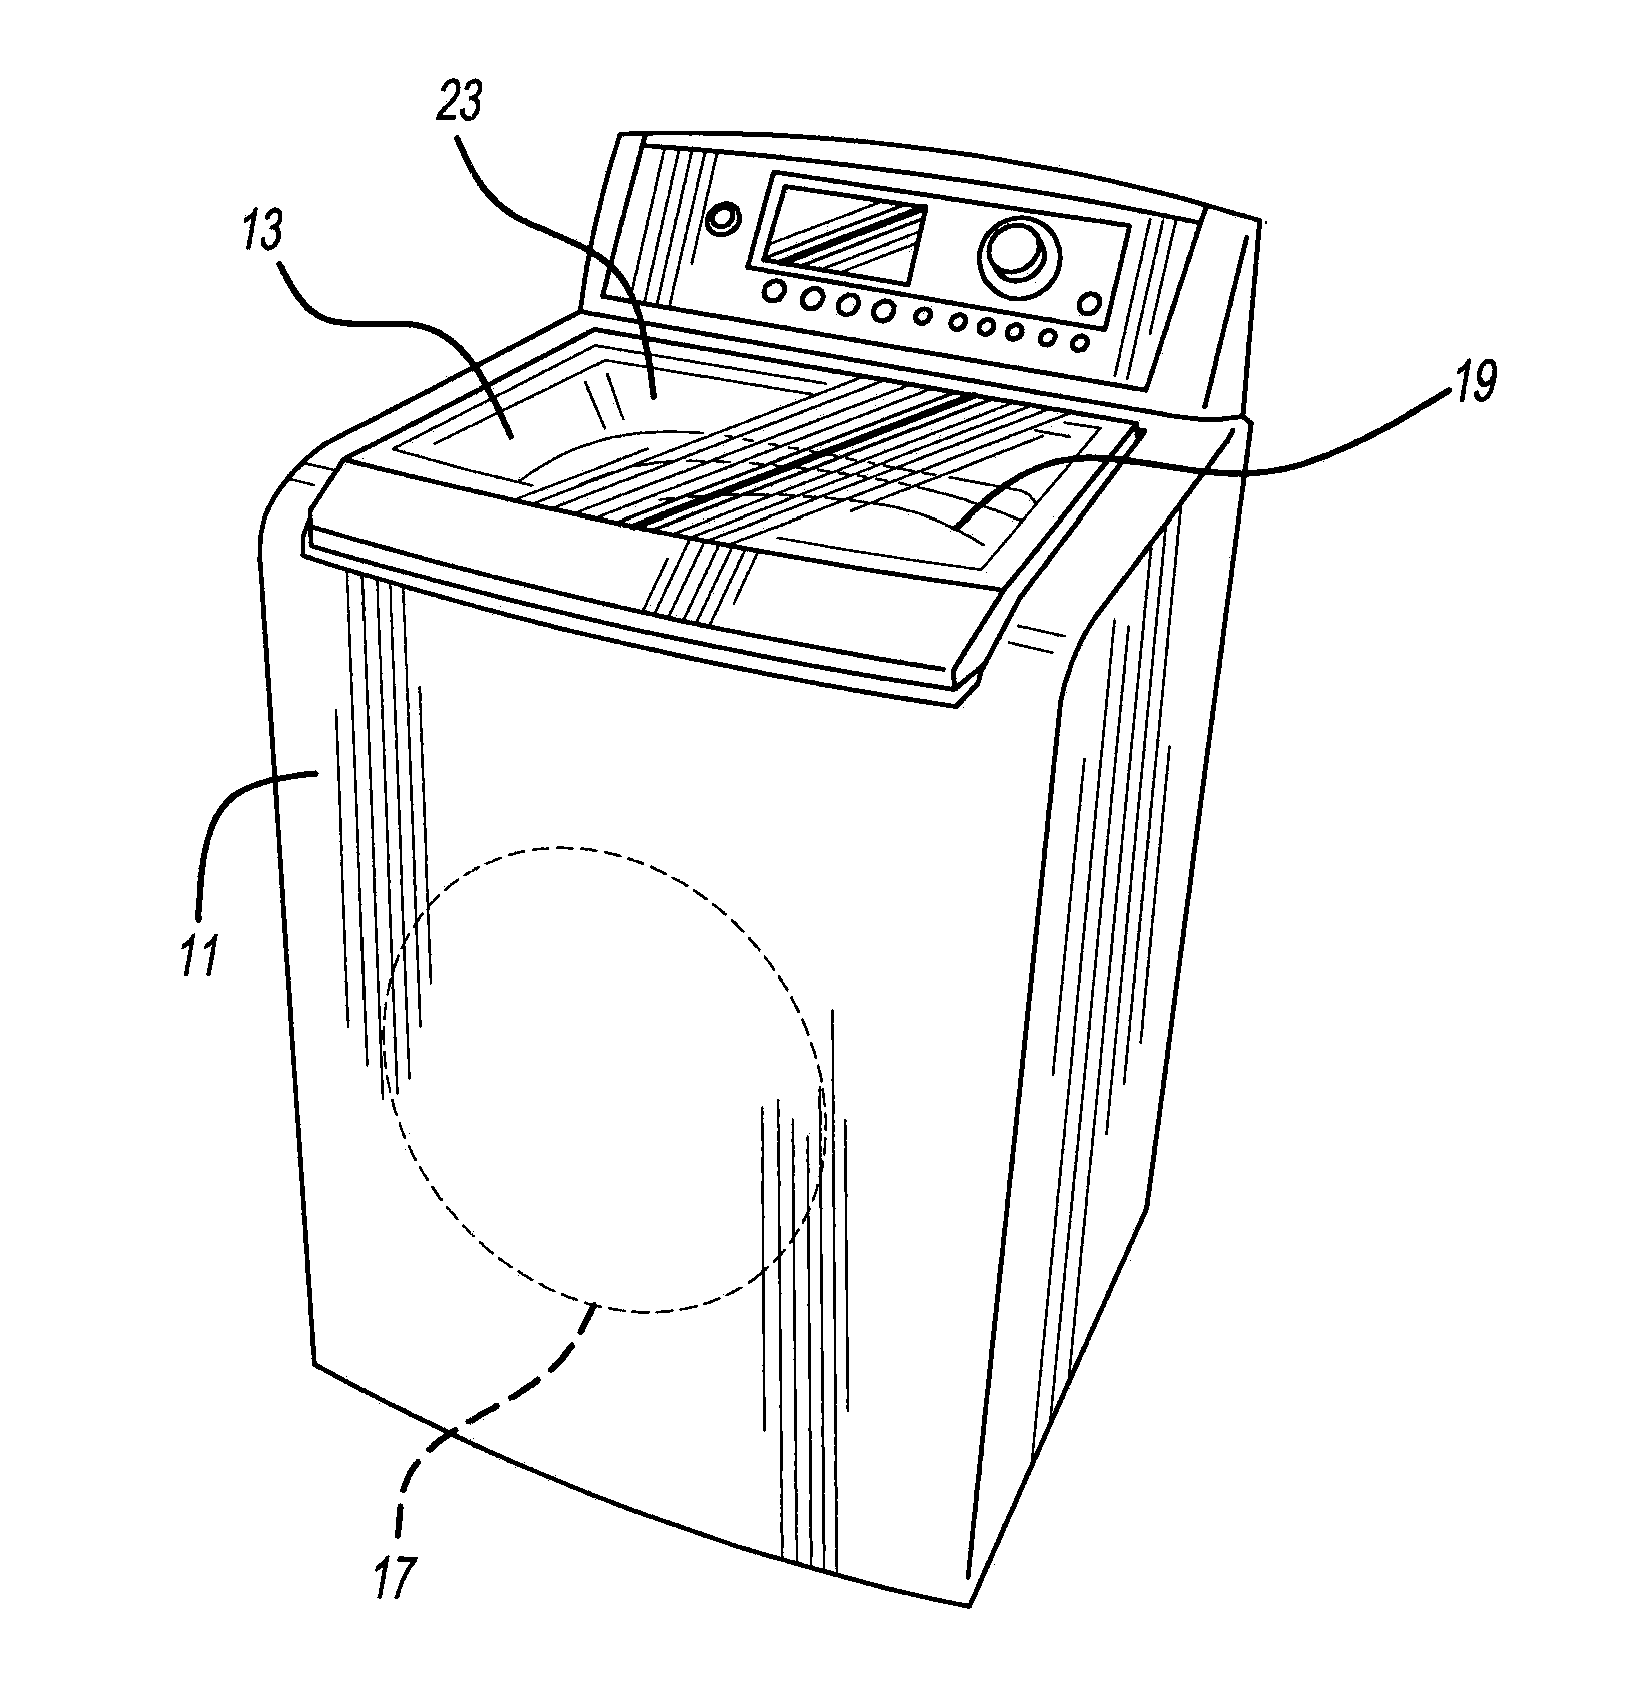 Appliance apparatus including a bonded bracket